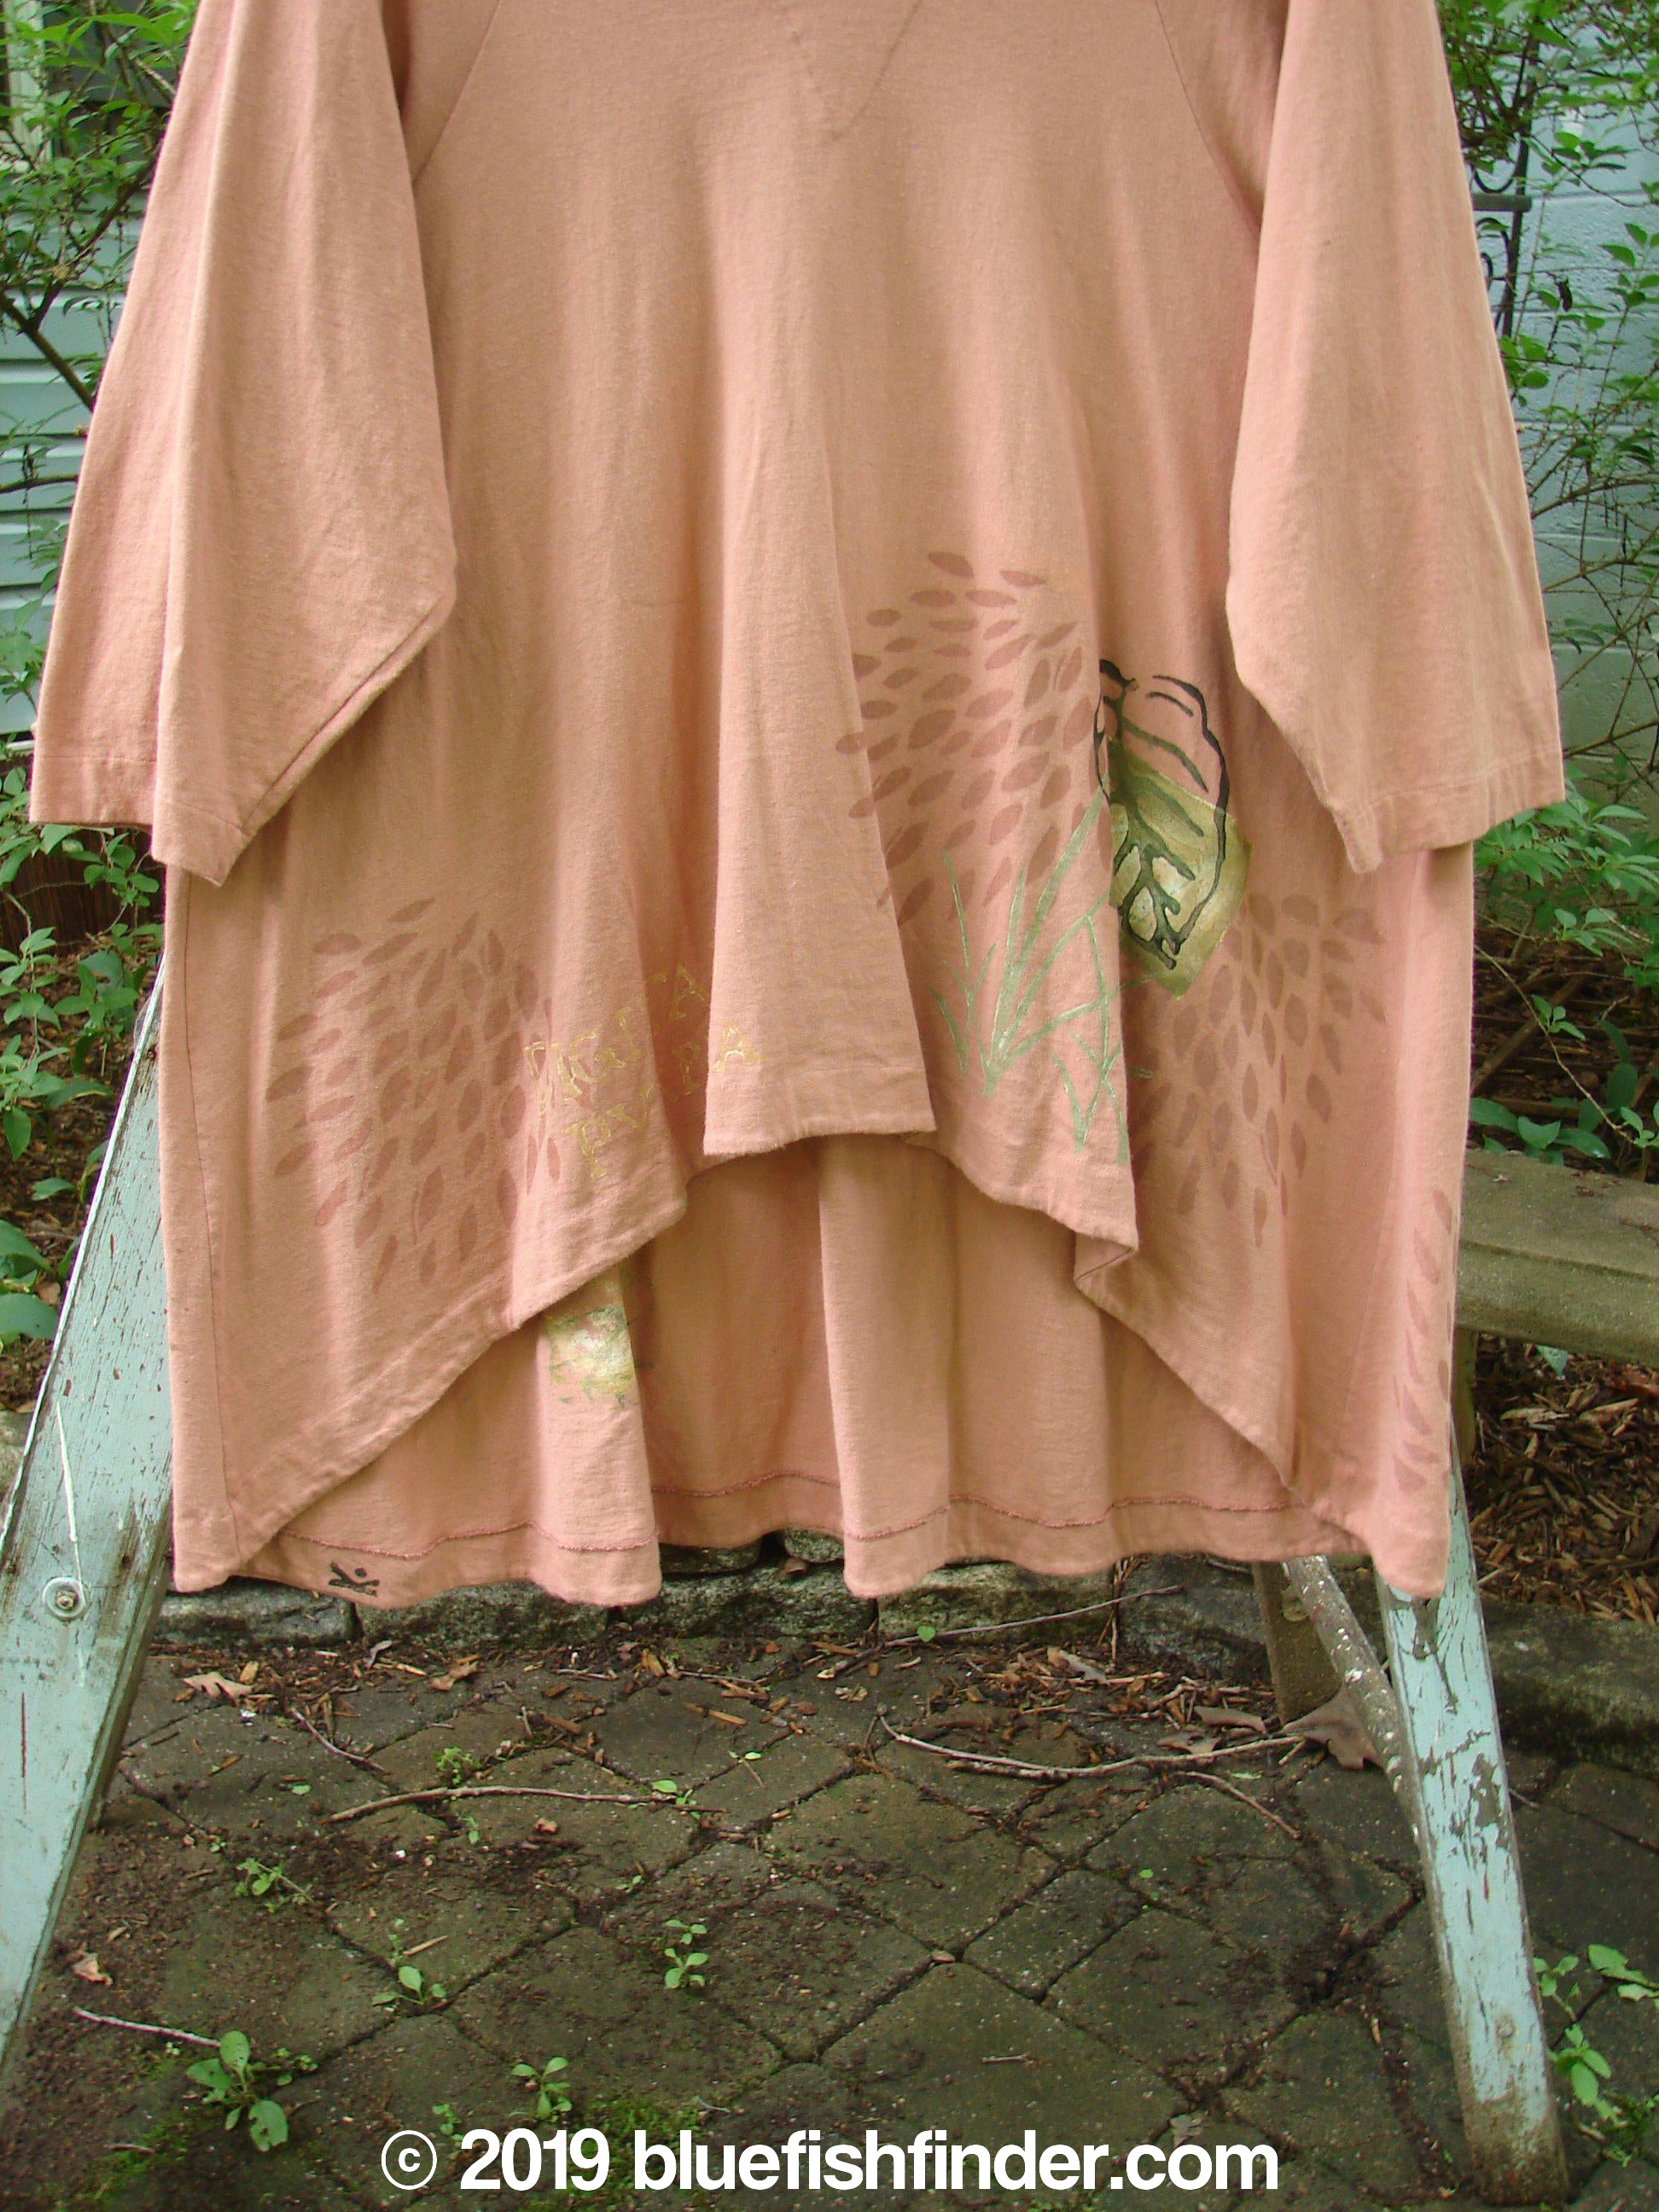 1998 Botanicals Bell Flower Top Magnolia Size 2: A pink shirt on a ladder with a wood beam close-up and plants growing out of a stone surface.